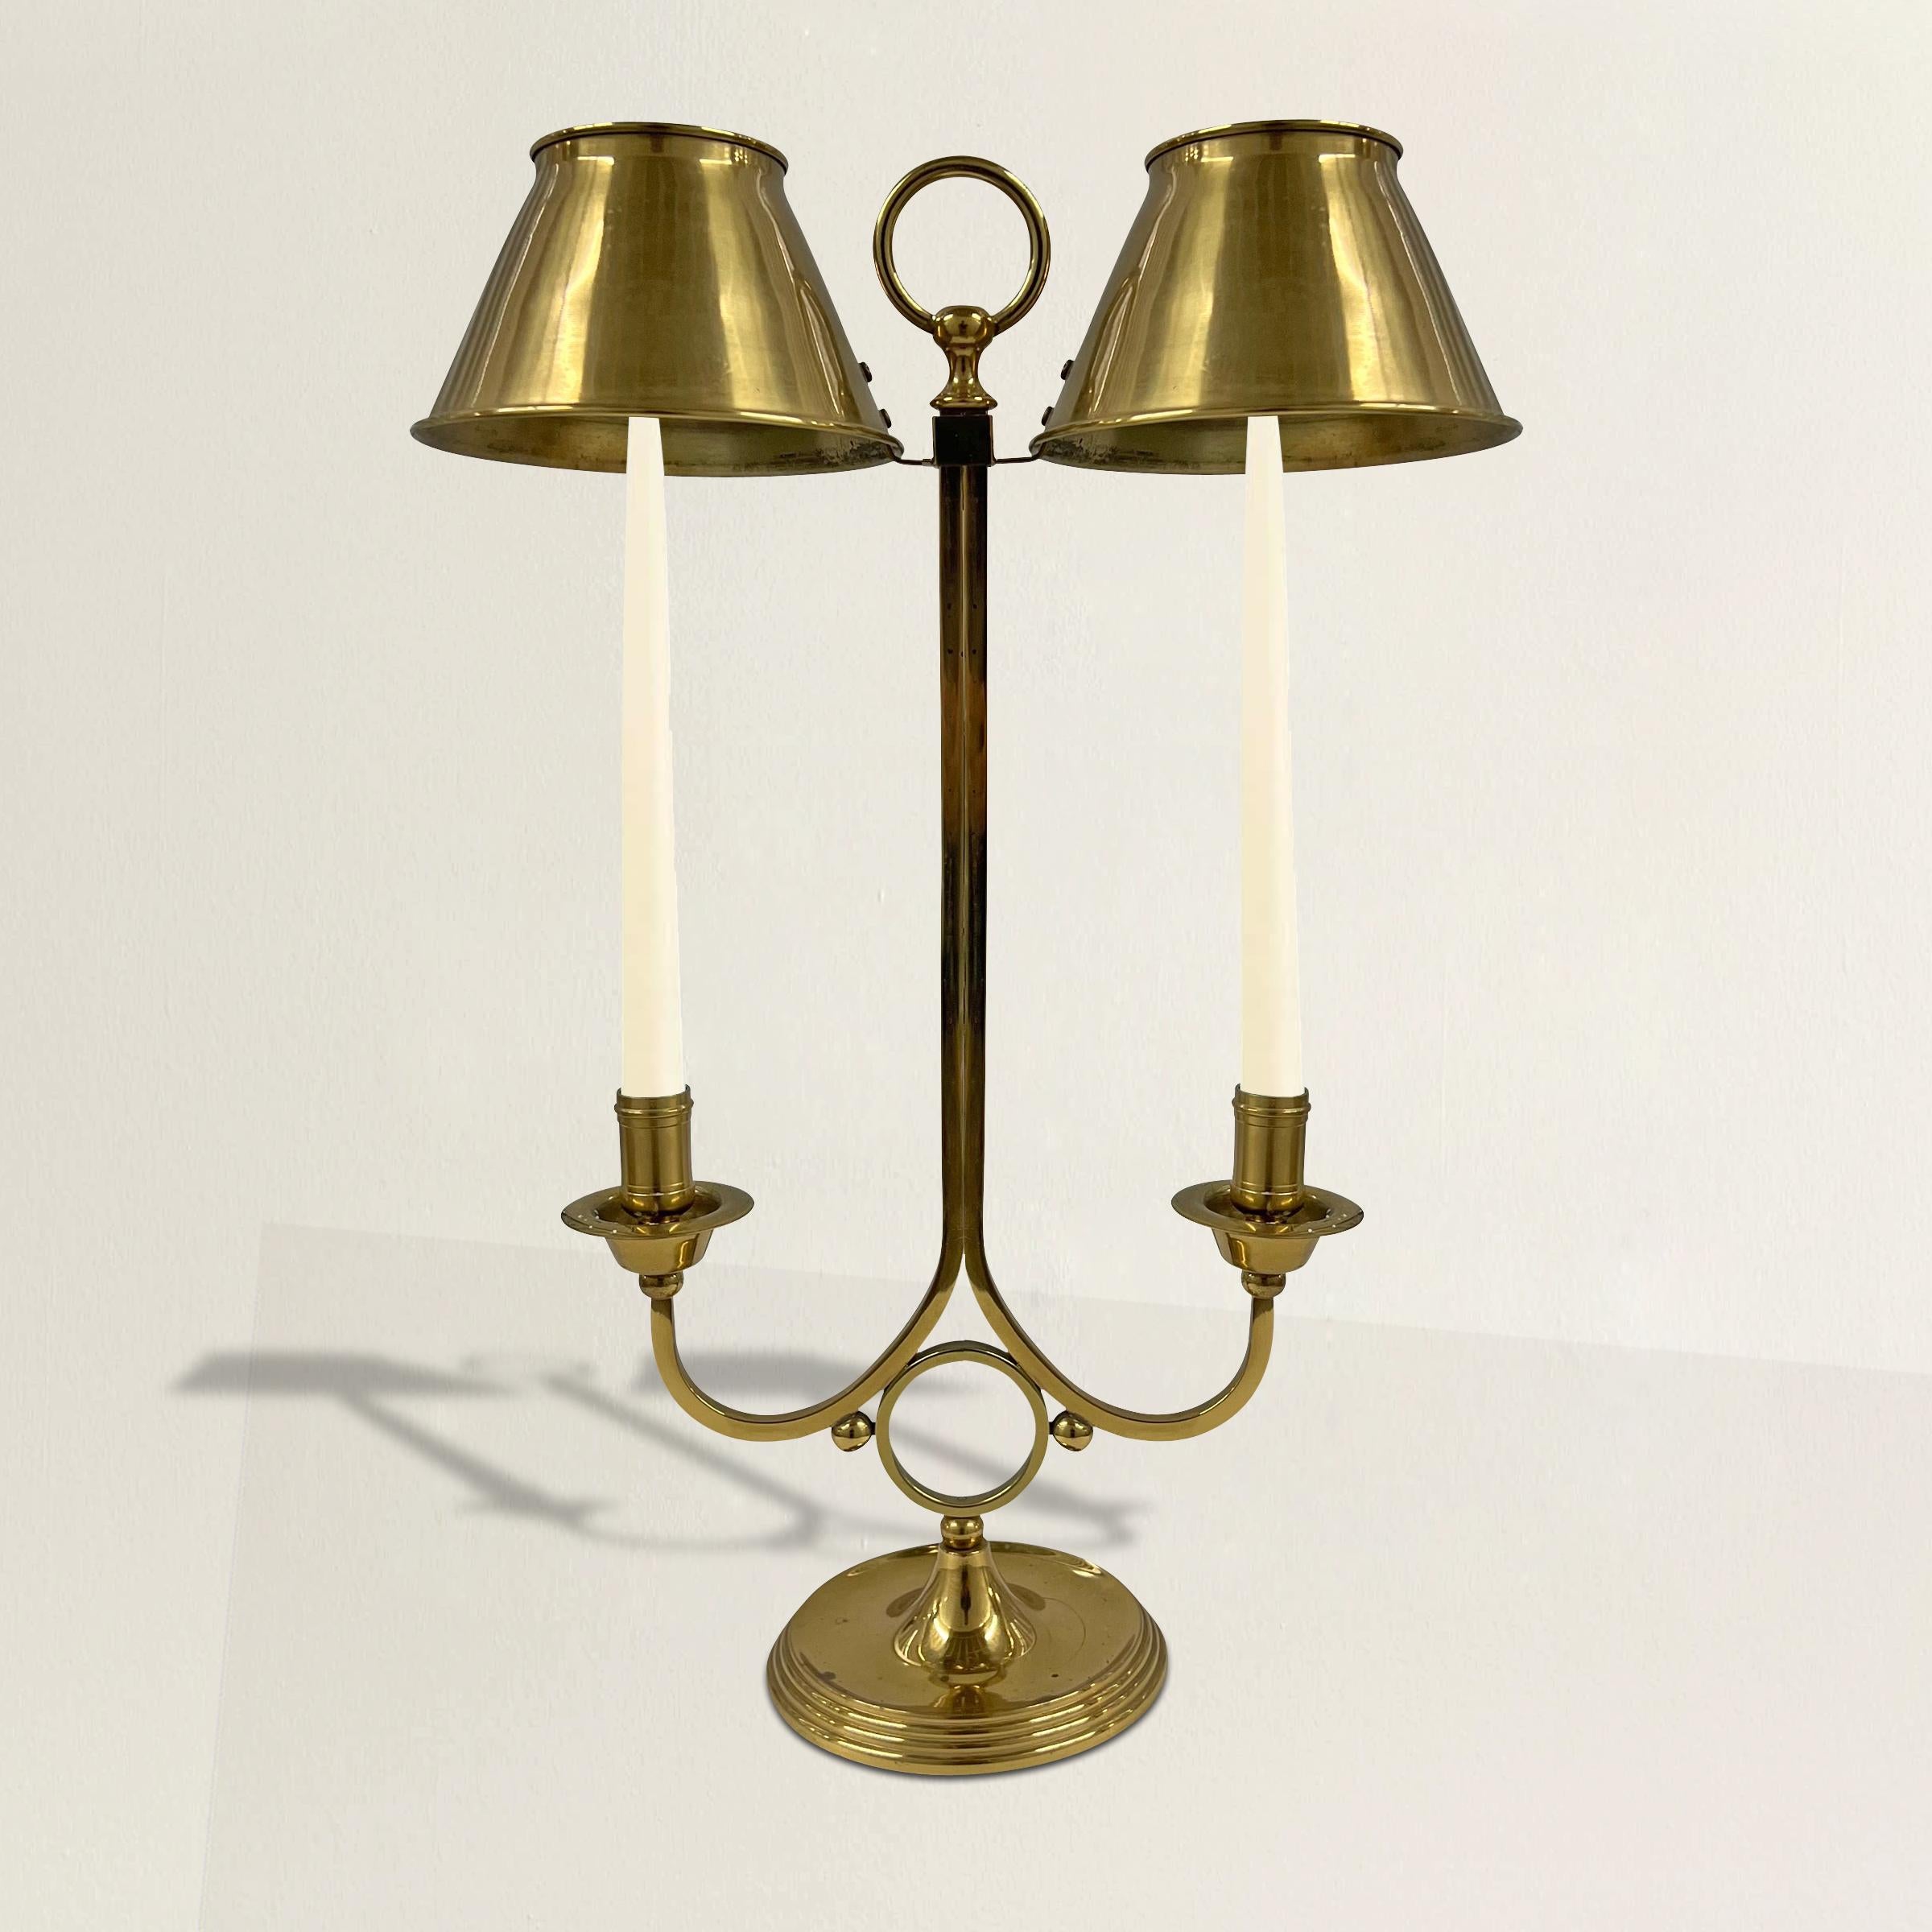 A chic vintage American brass two-arm candle lamp with shades that can be adjusted as the candles burn.  Perfect for your dining table or console table at your next dinner party!